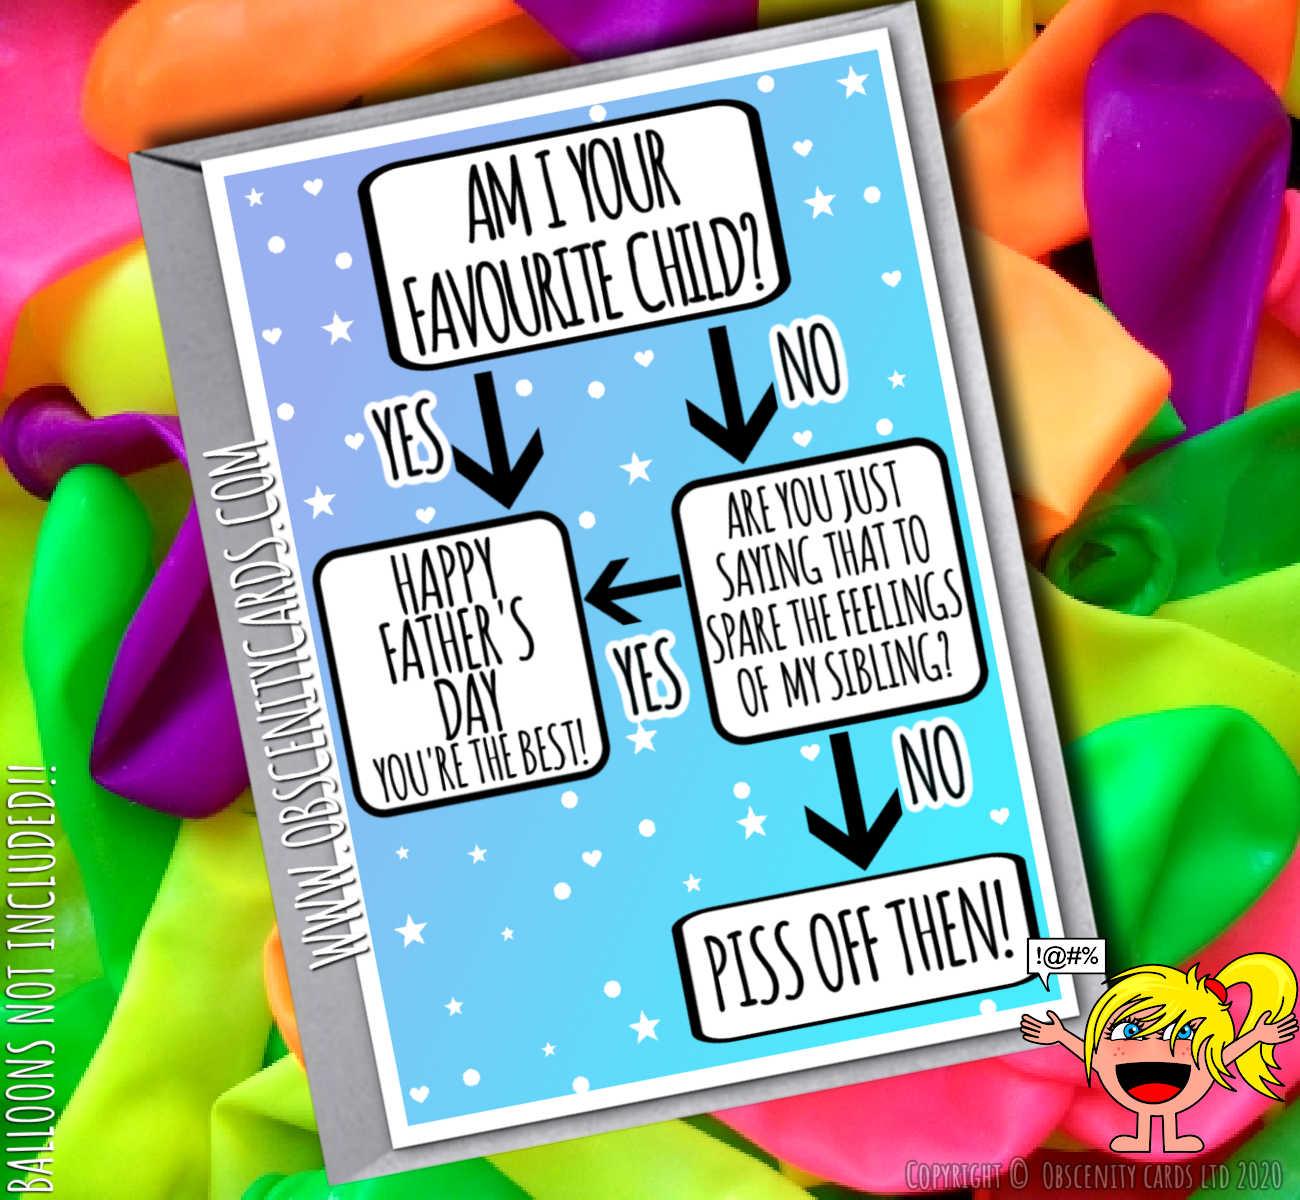 AM I YOUR FAVOURITE CHILD? FLOW CHART PISS/FUCK SIBLING/S OFF FATHER'S DAY CARD